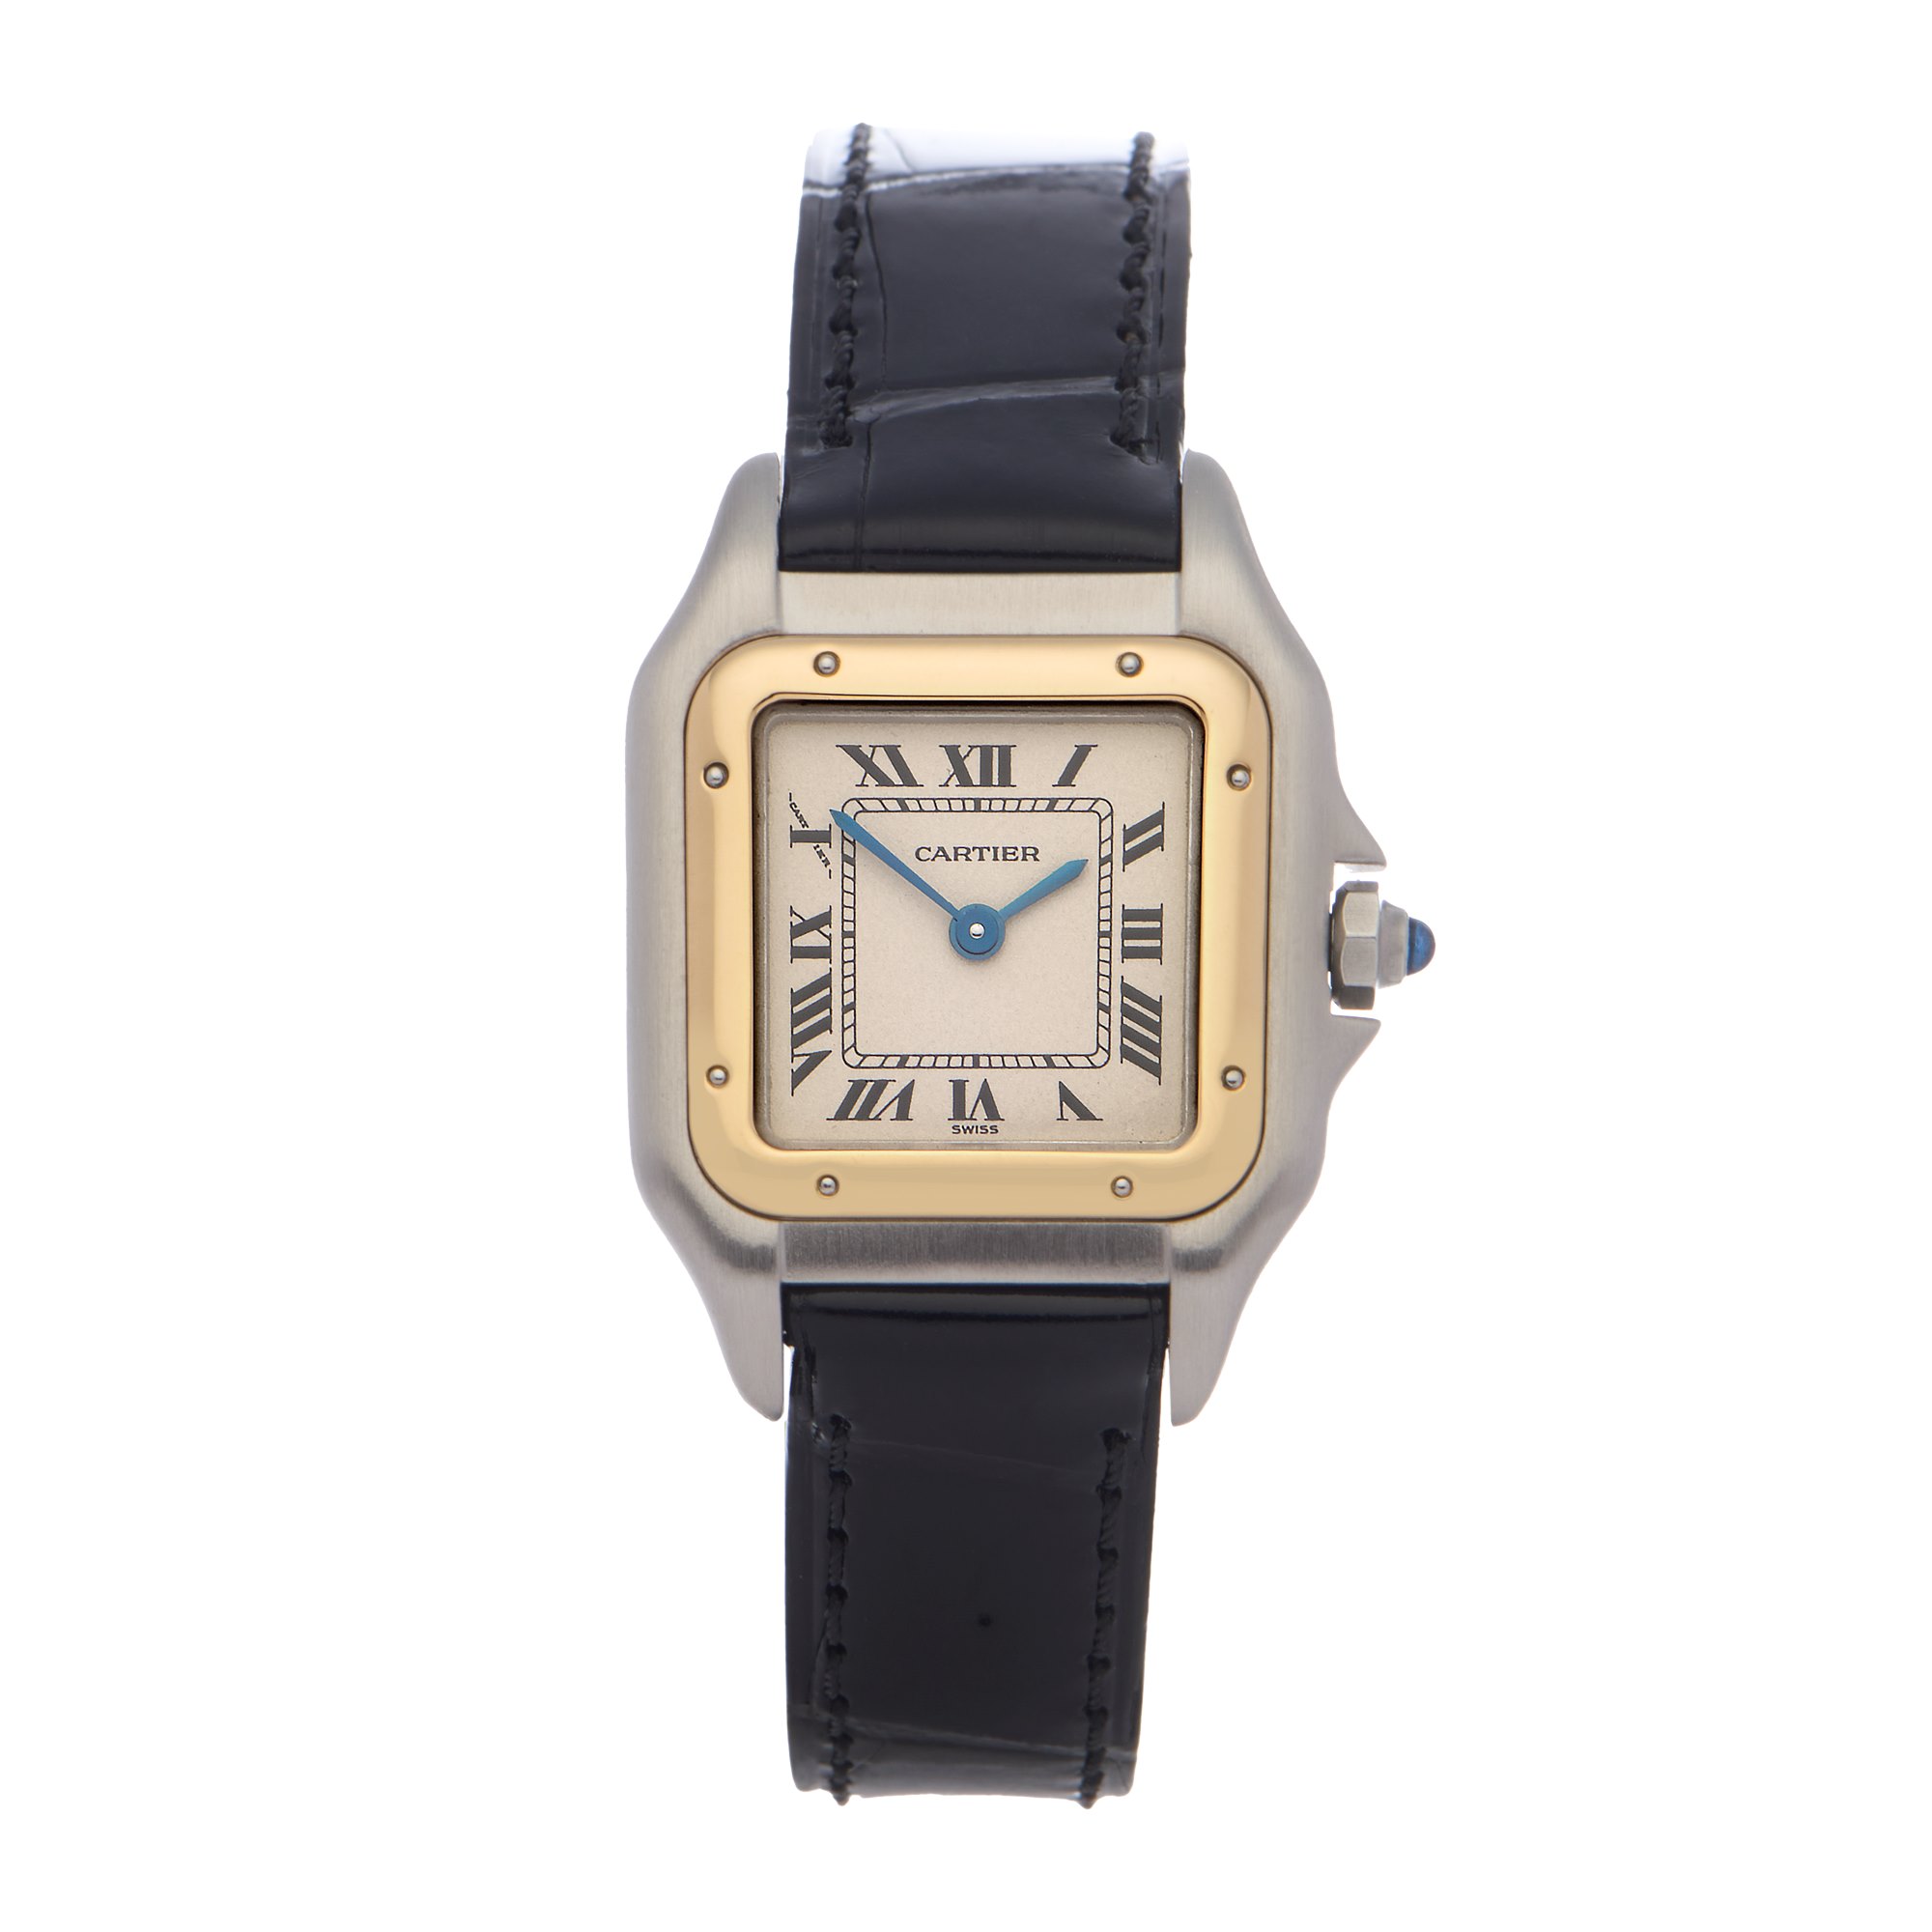 Cartier Panthère 18K Yellow Gold & Stainless Steel 1120